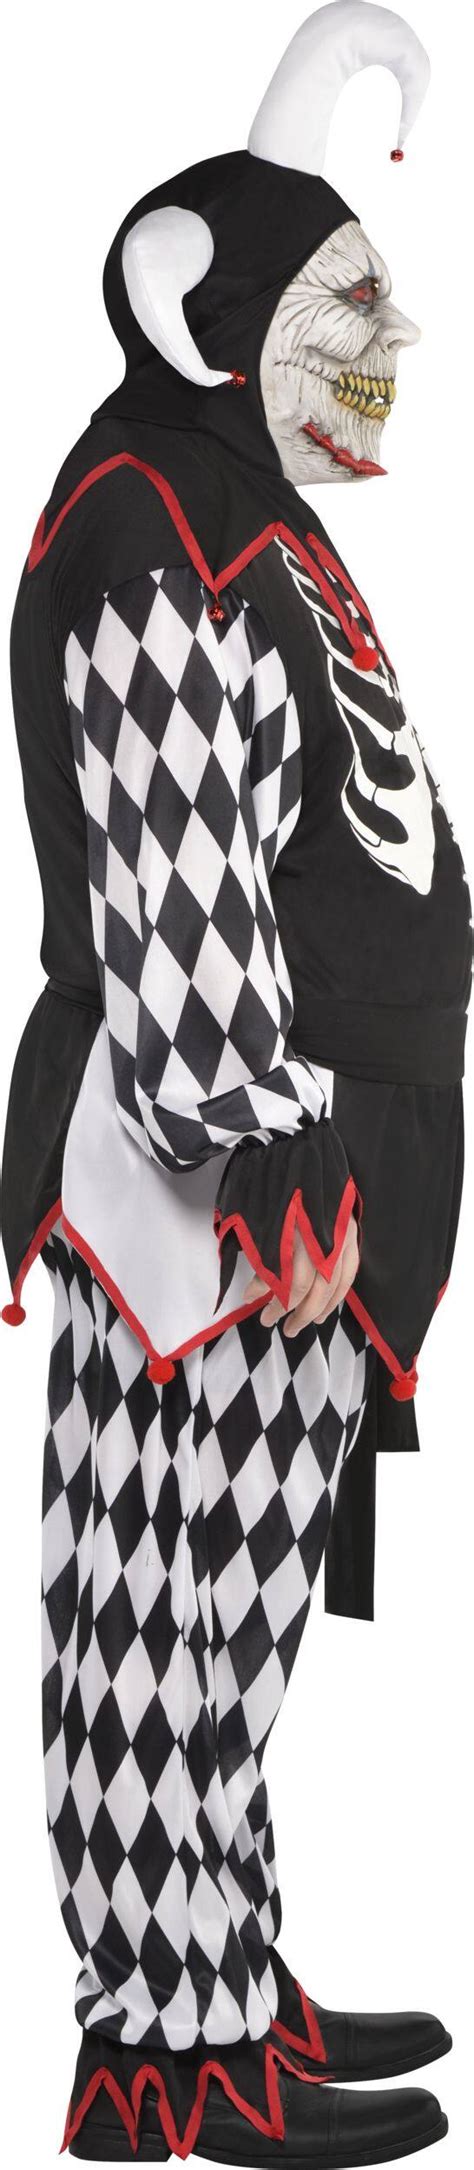 Mens Sinister Jester Blackwhite Tunic With Pants And Mask Halloween